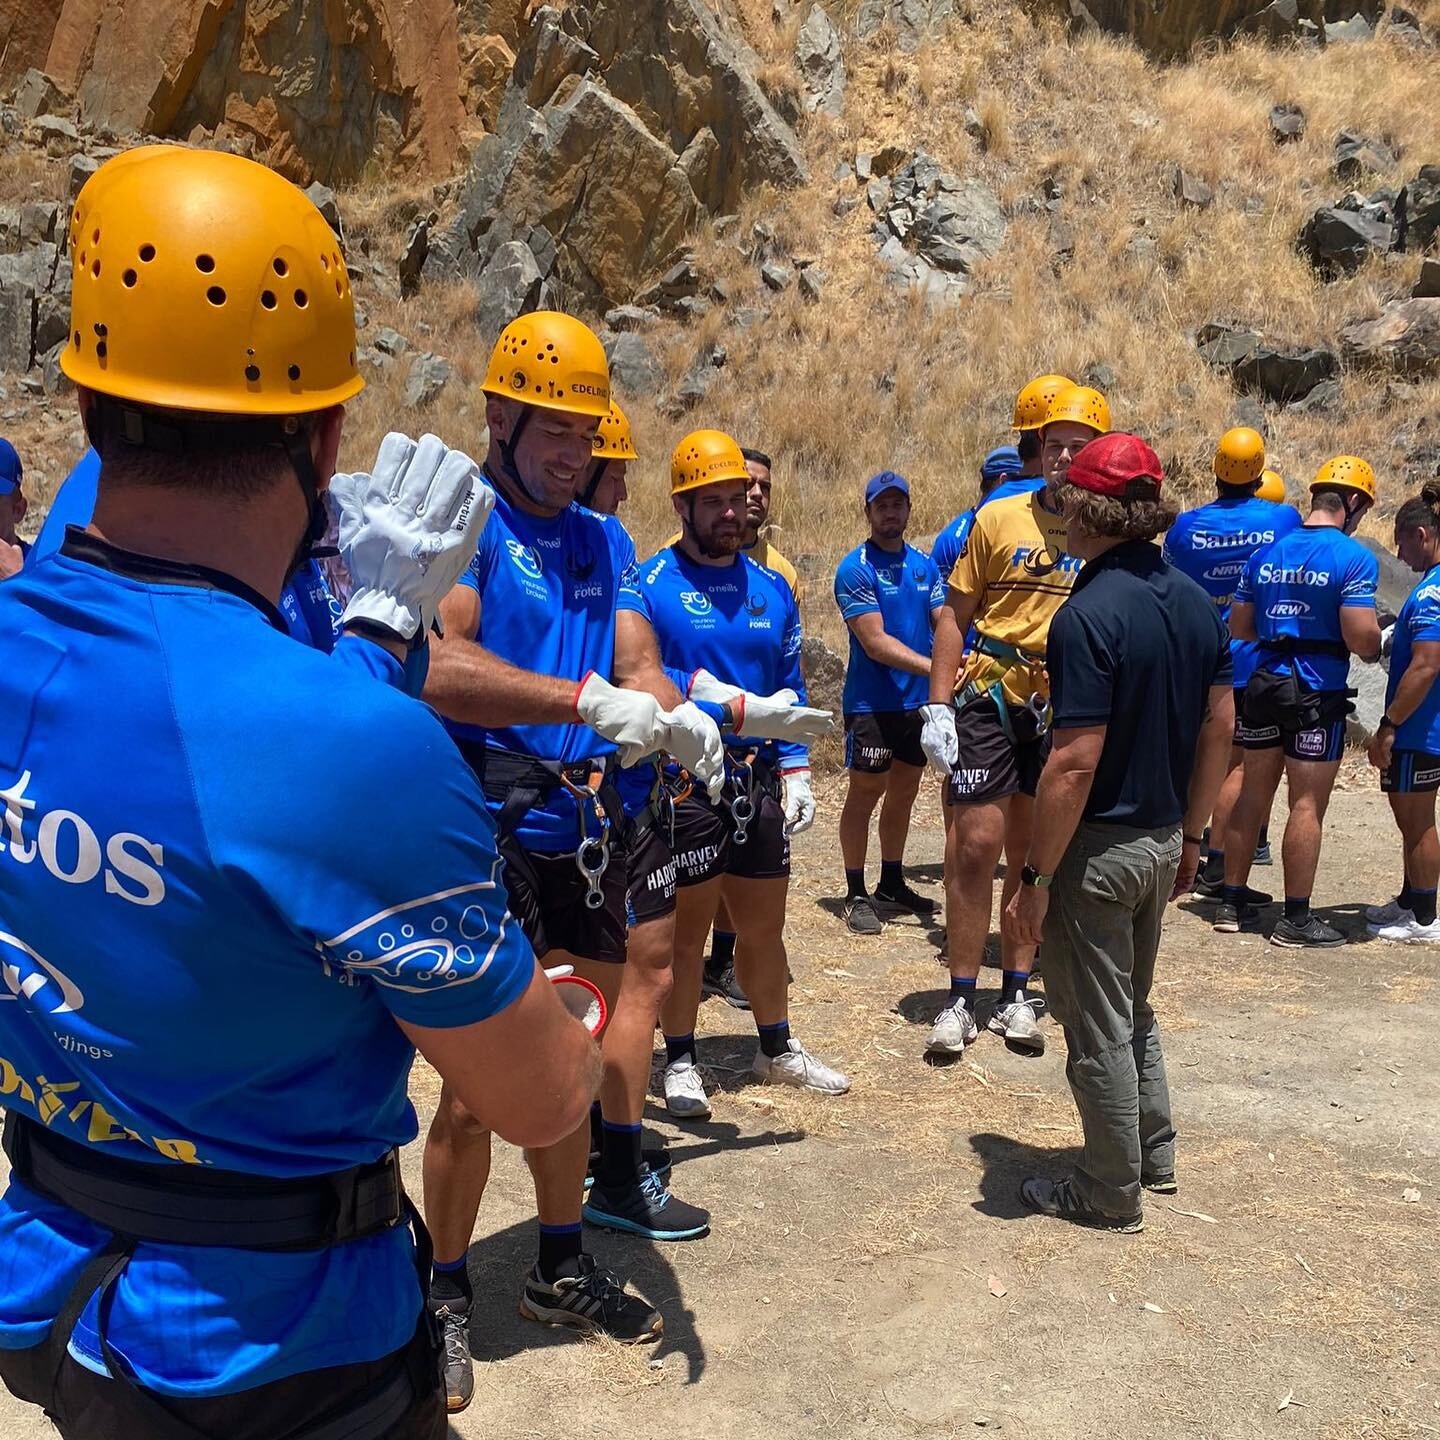 The Mettle Global team were out and about today with the players from the Western Force facilitating #leadership, #resilience and #team building activities. Thanks again for having us!